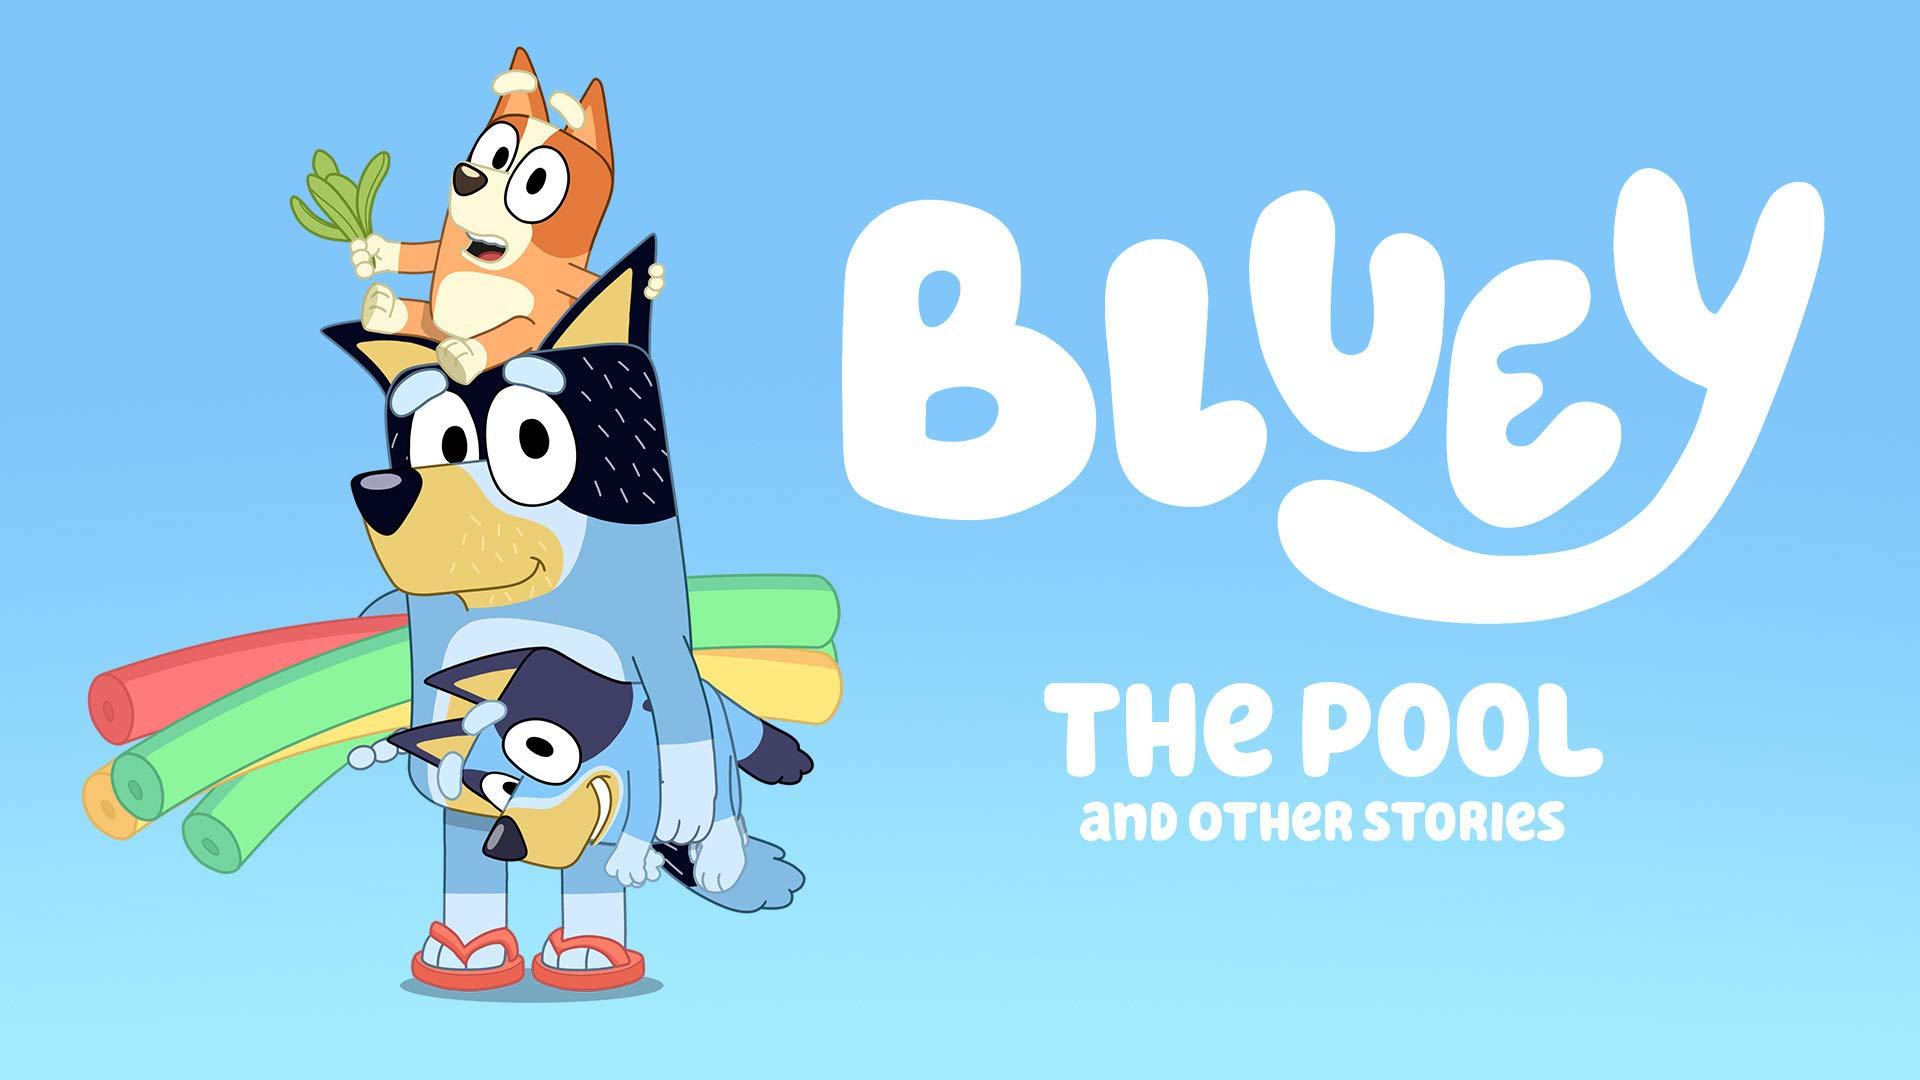 Download Bluey the Dog on her Adventures  Wallpaperscom